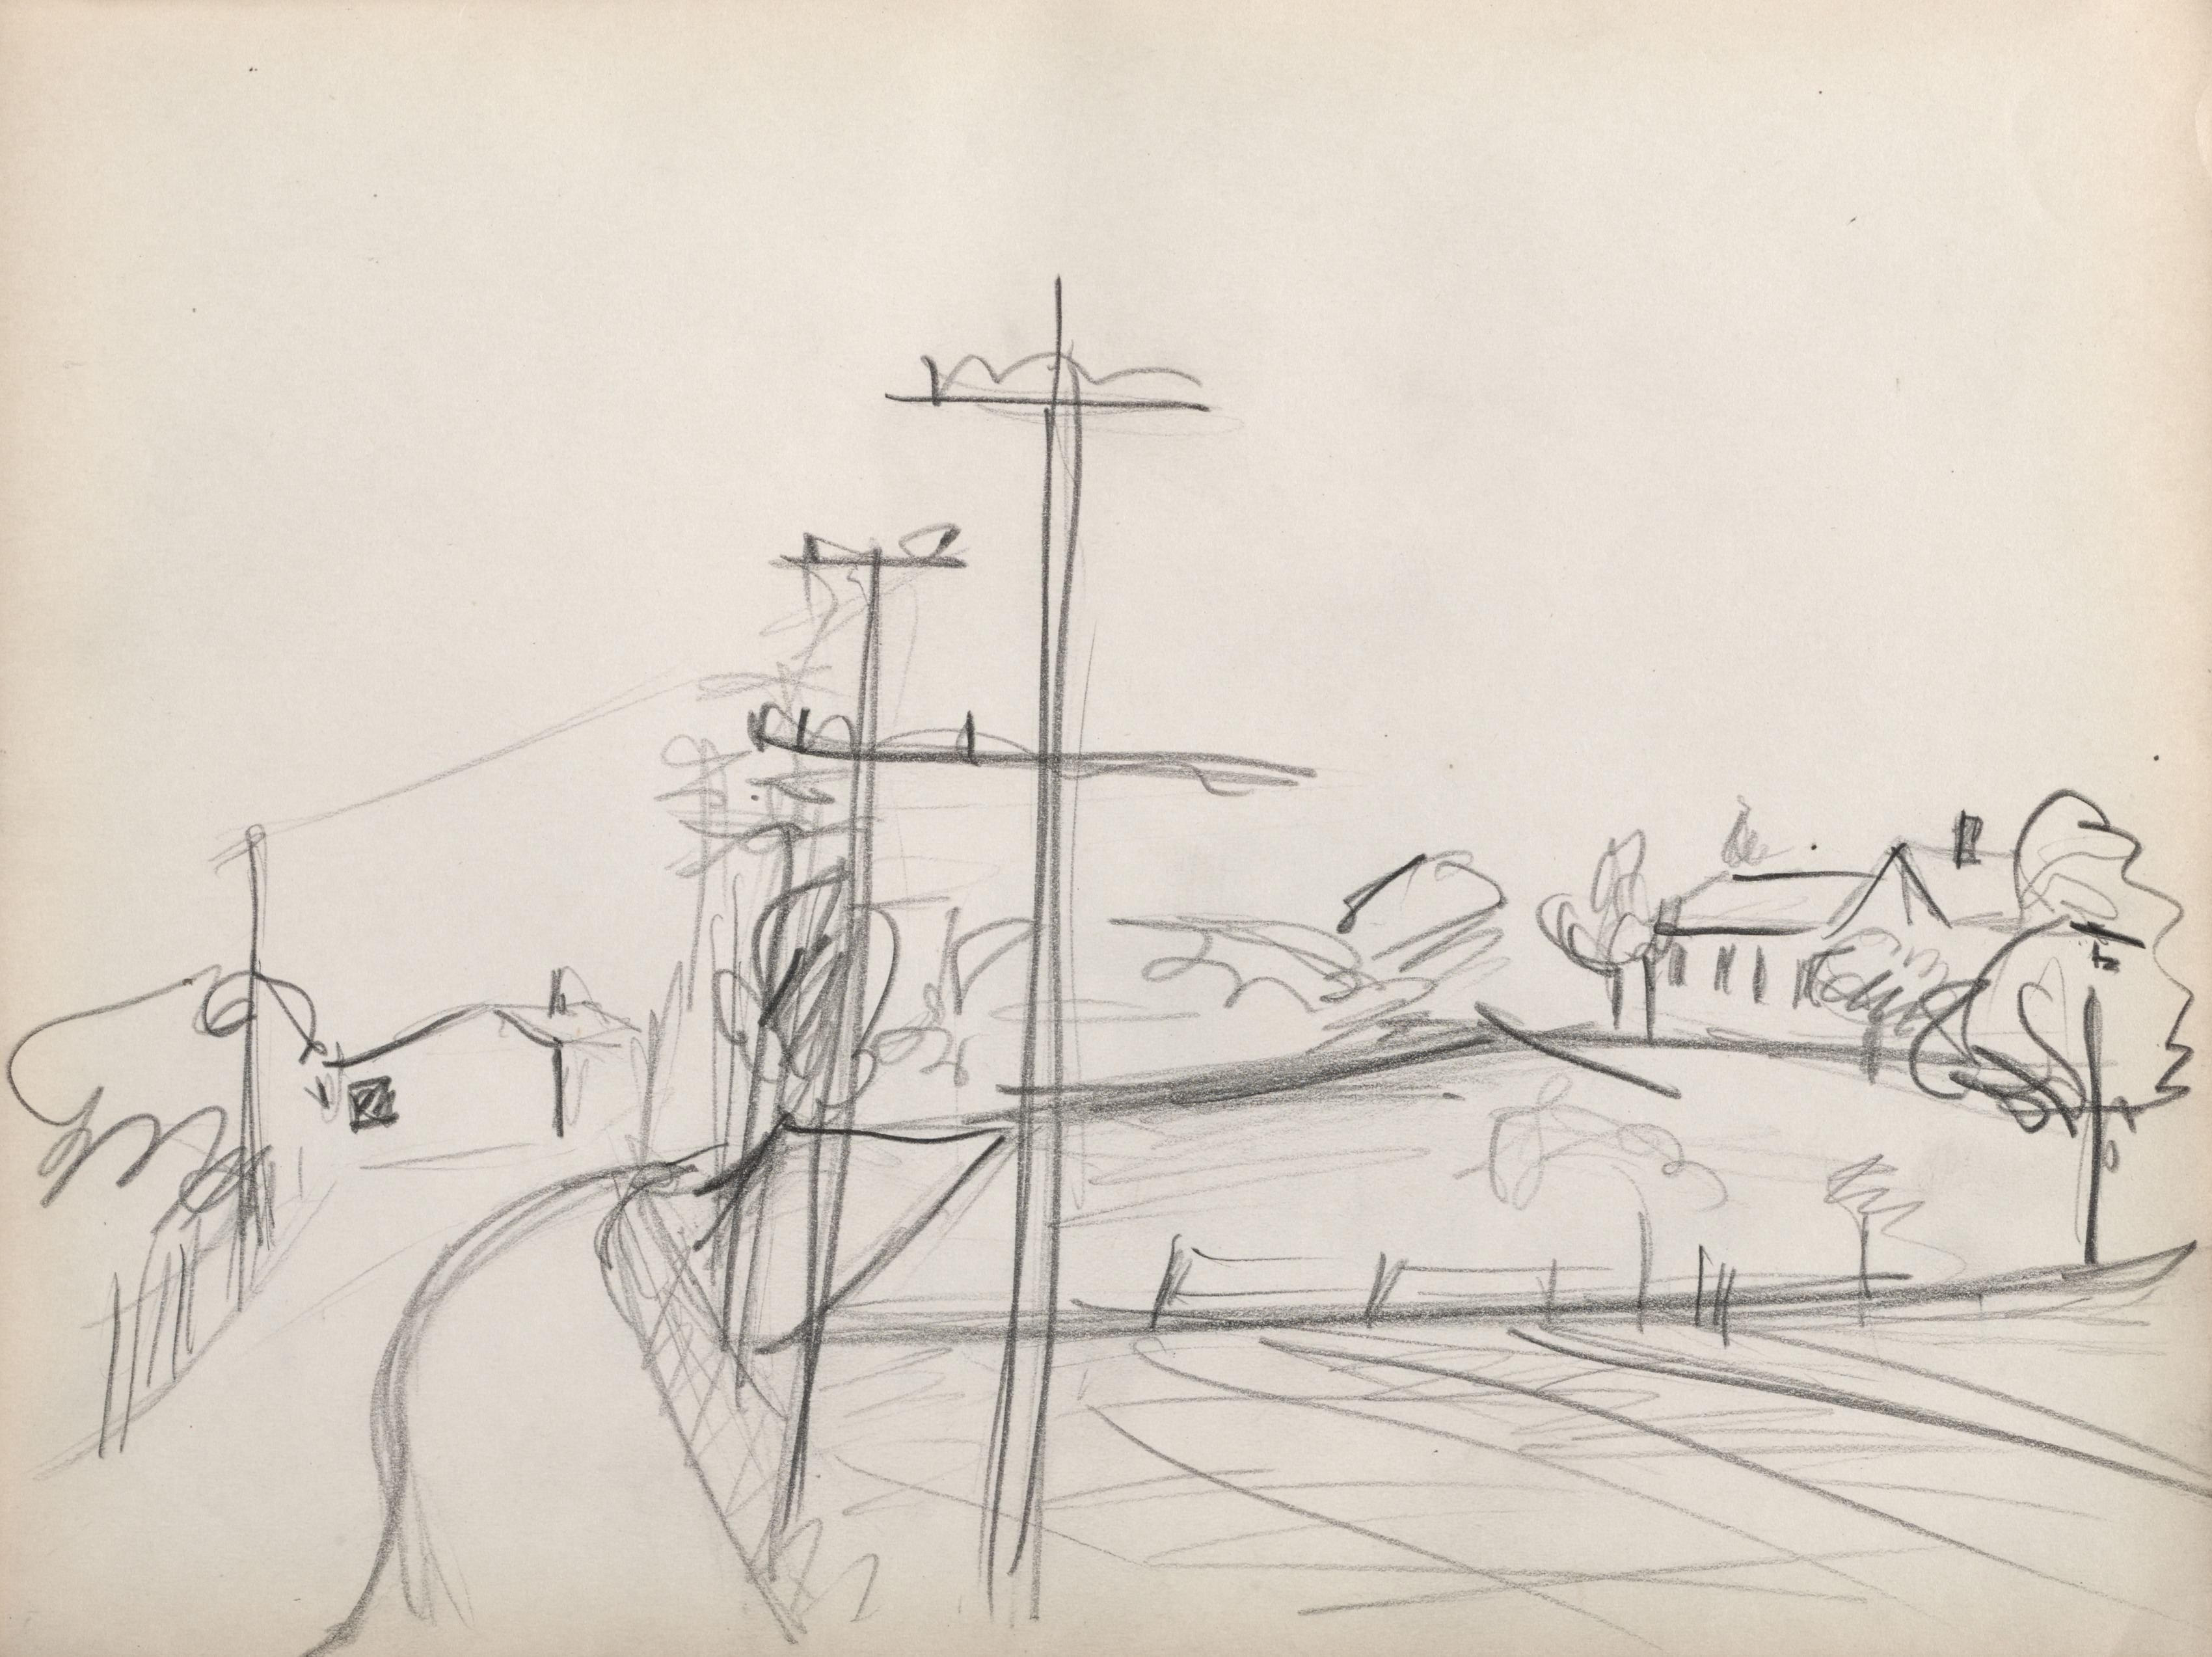 Sketchbook No. 2, page 45: Telephone poles